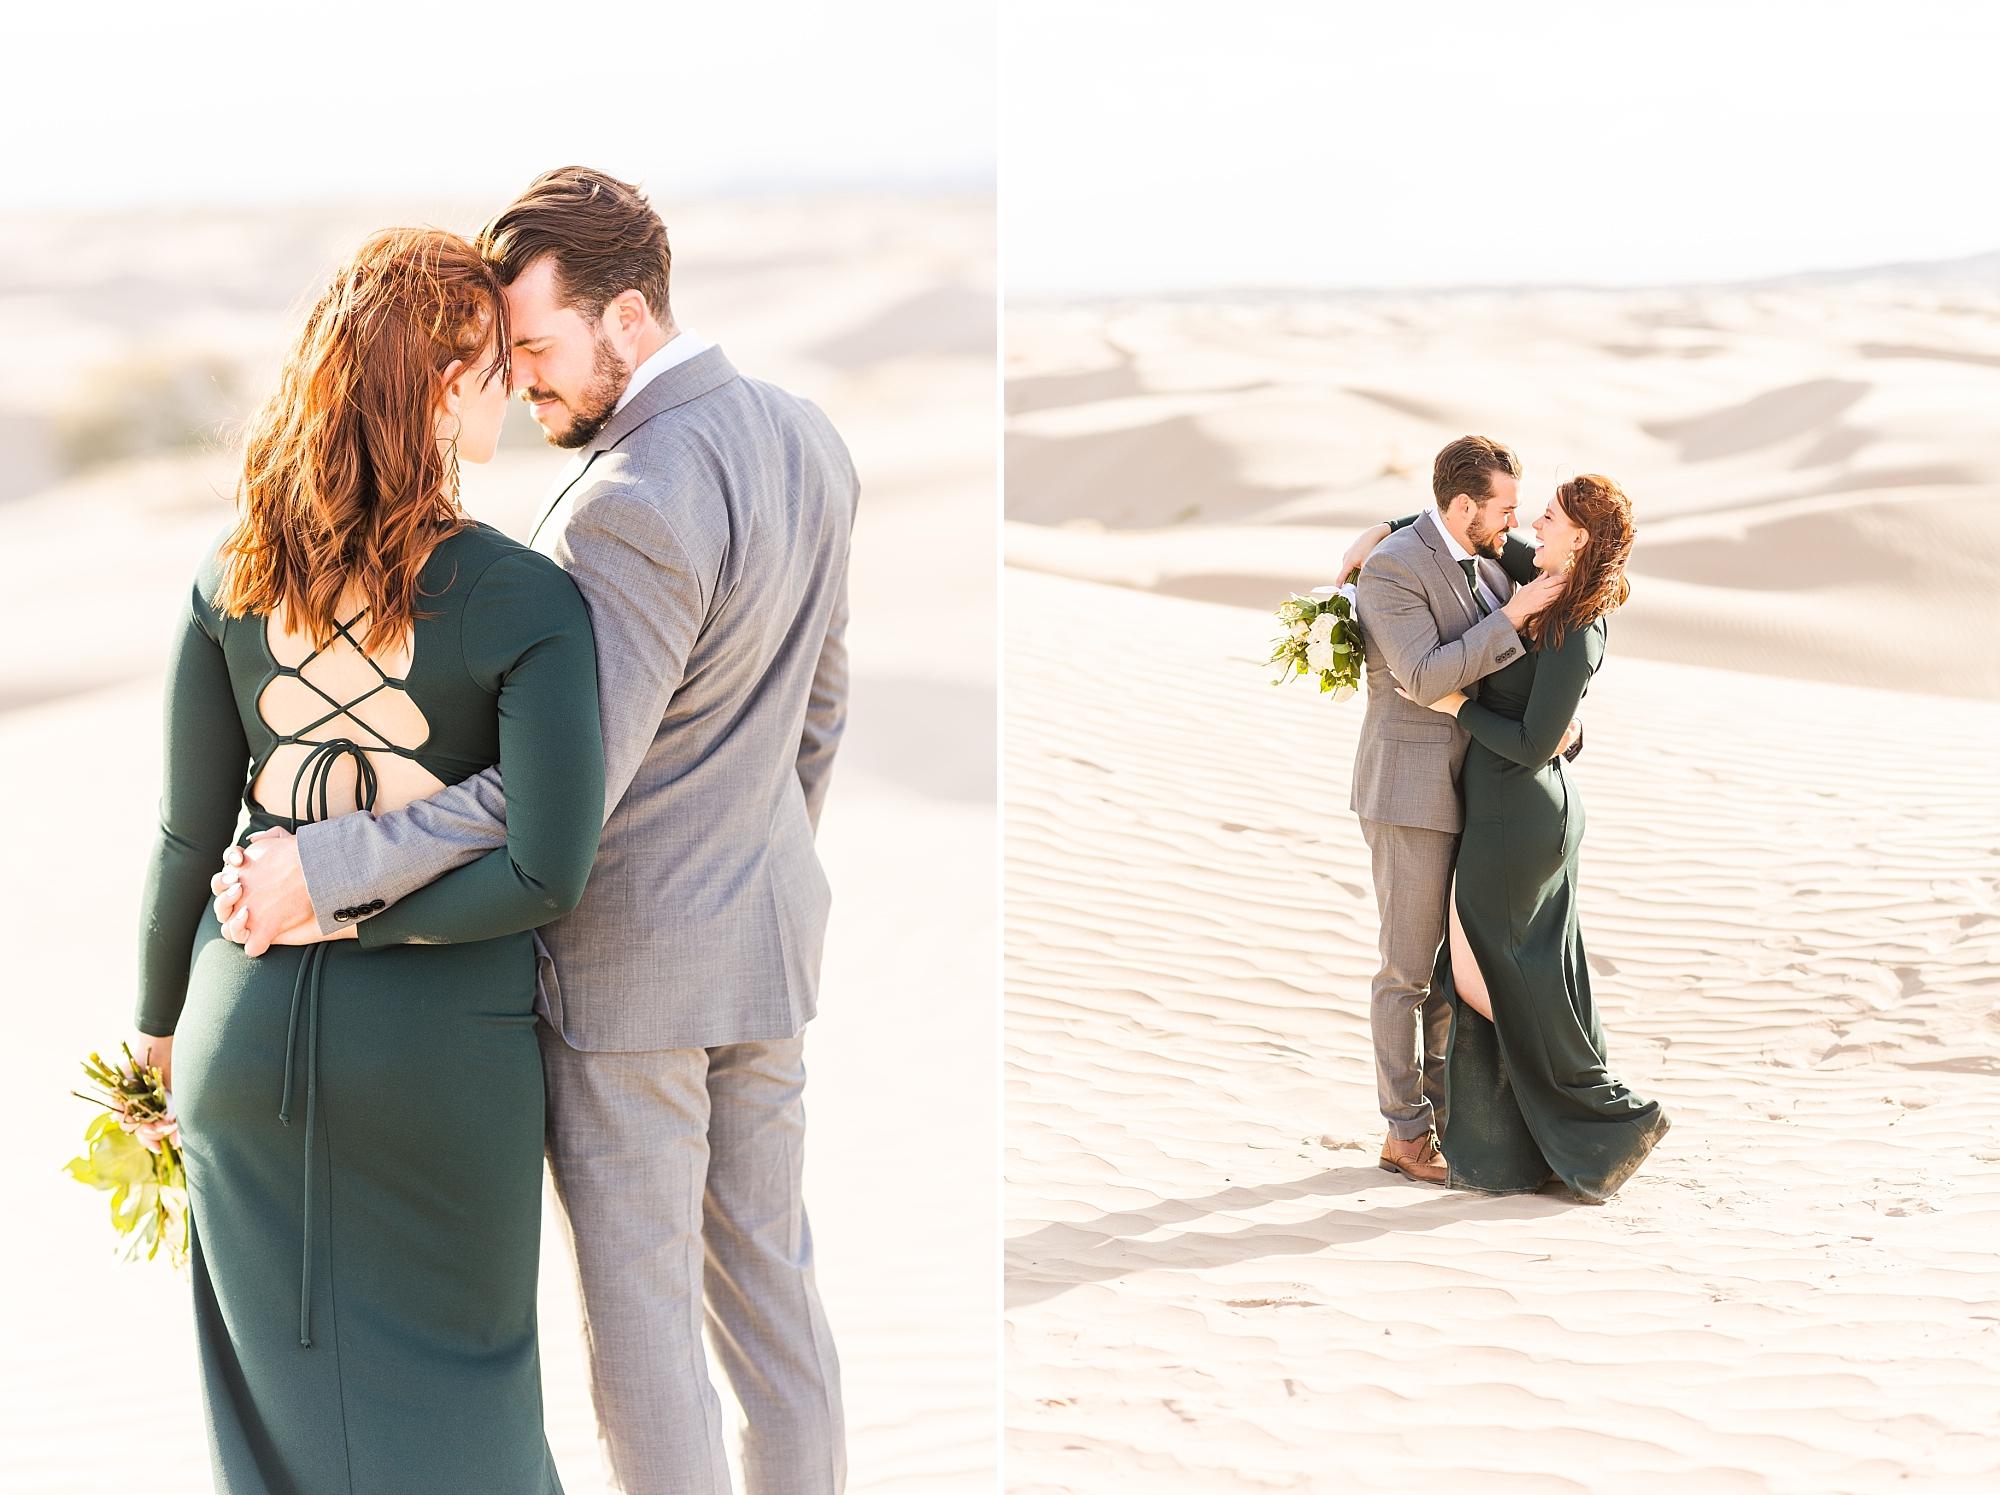 Gold and emerald wedding colors